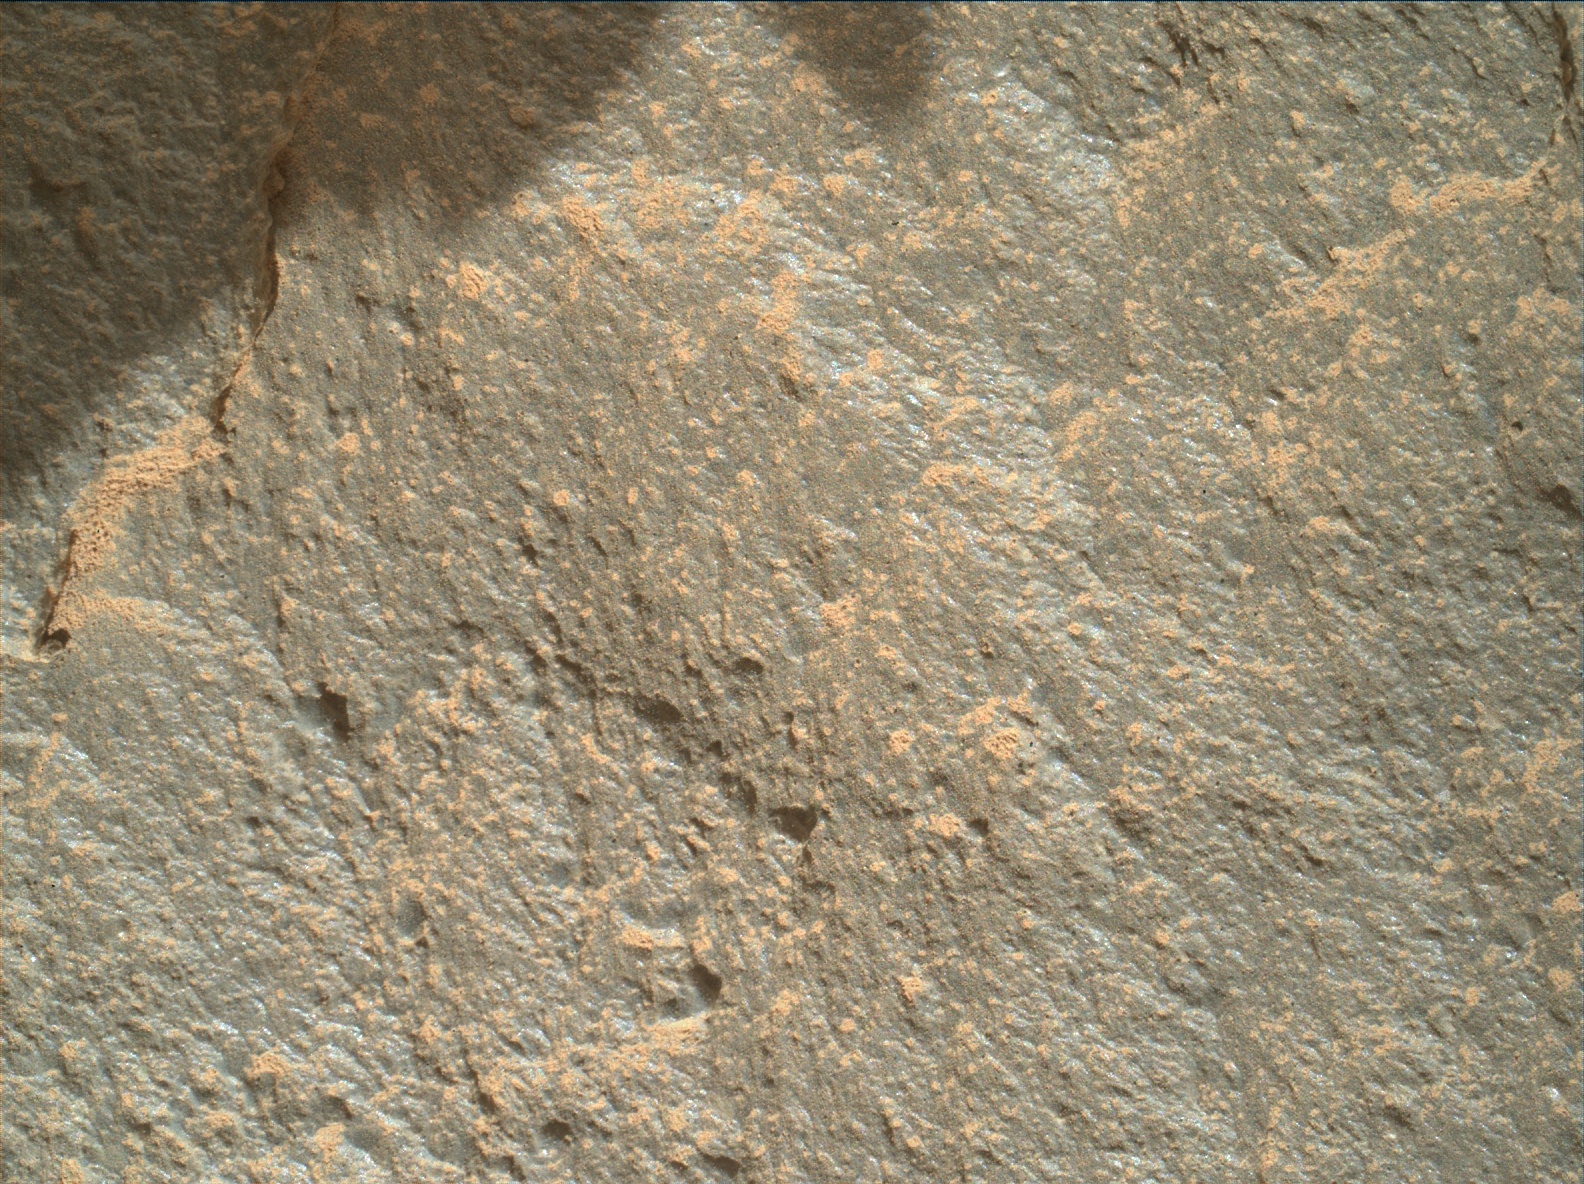 Nasa's Mars rover Curiosity acquired this image using its Mars Hand Lens Imager (MAHLI) on Sol 1103